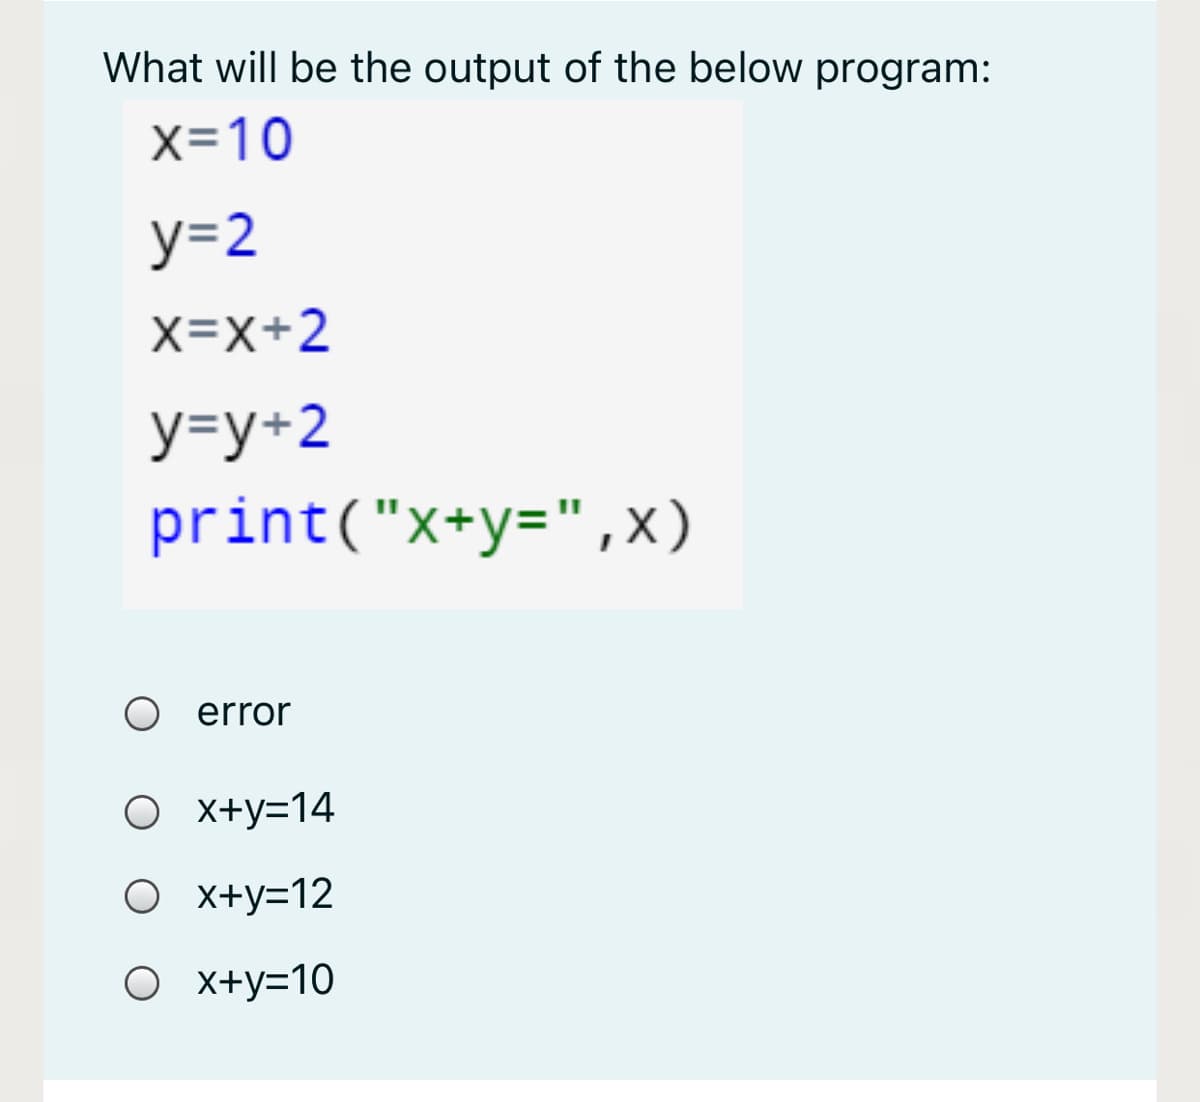 What will be the output of the below program:
x=10
y=2
X=X+2
y=y+2
print("x+y=",X)
O error
О х+у314
О х+у-12
О х-у-10
